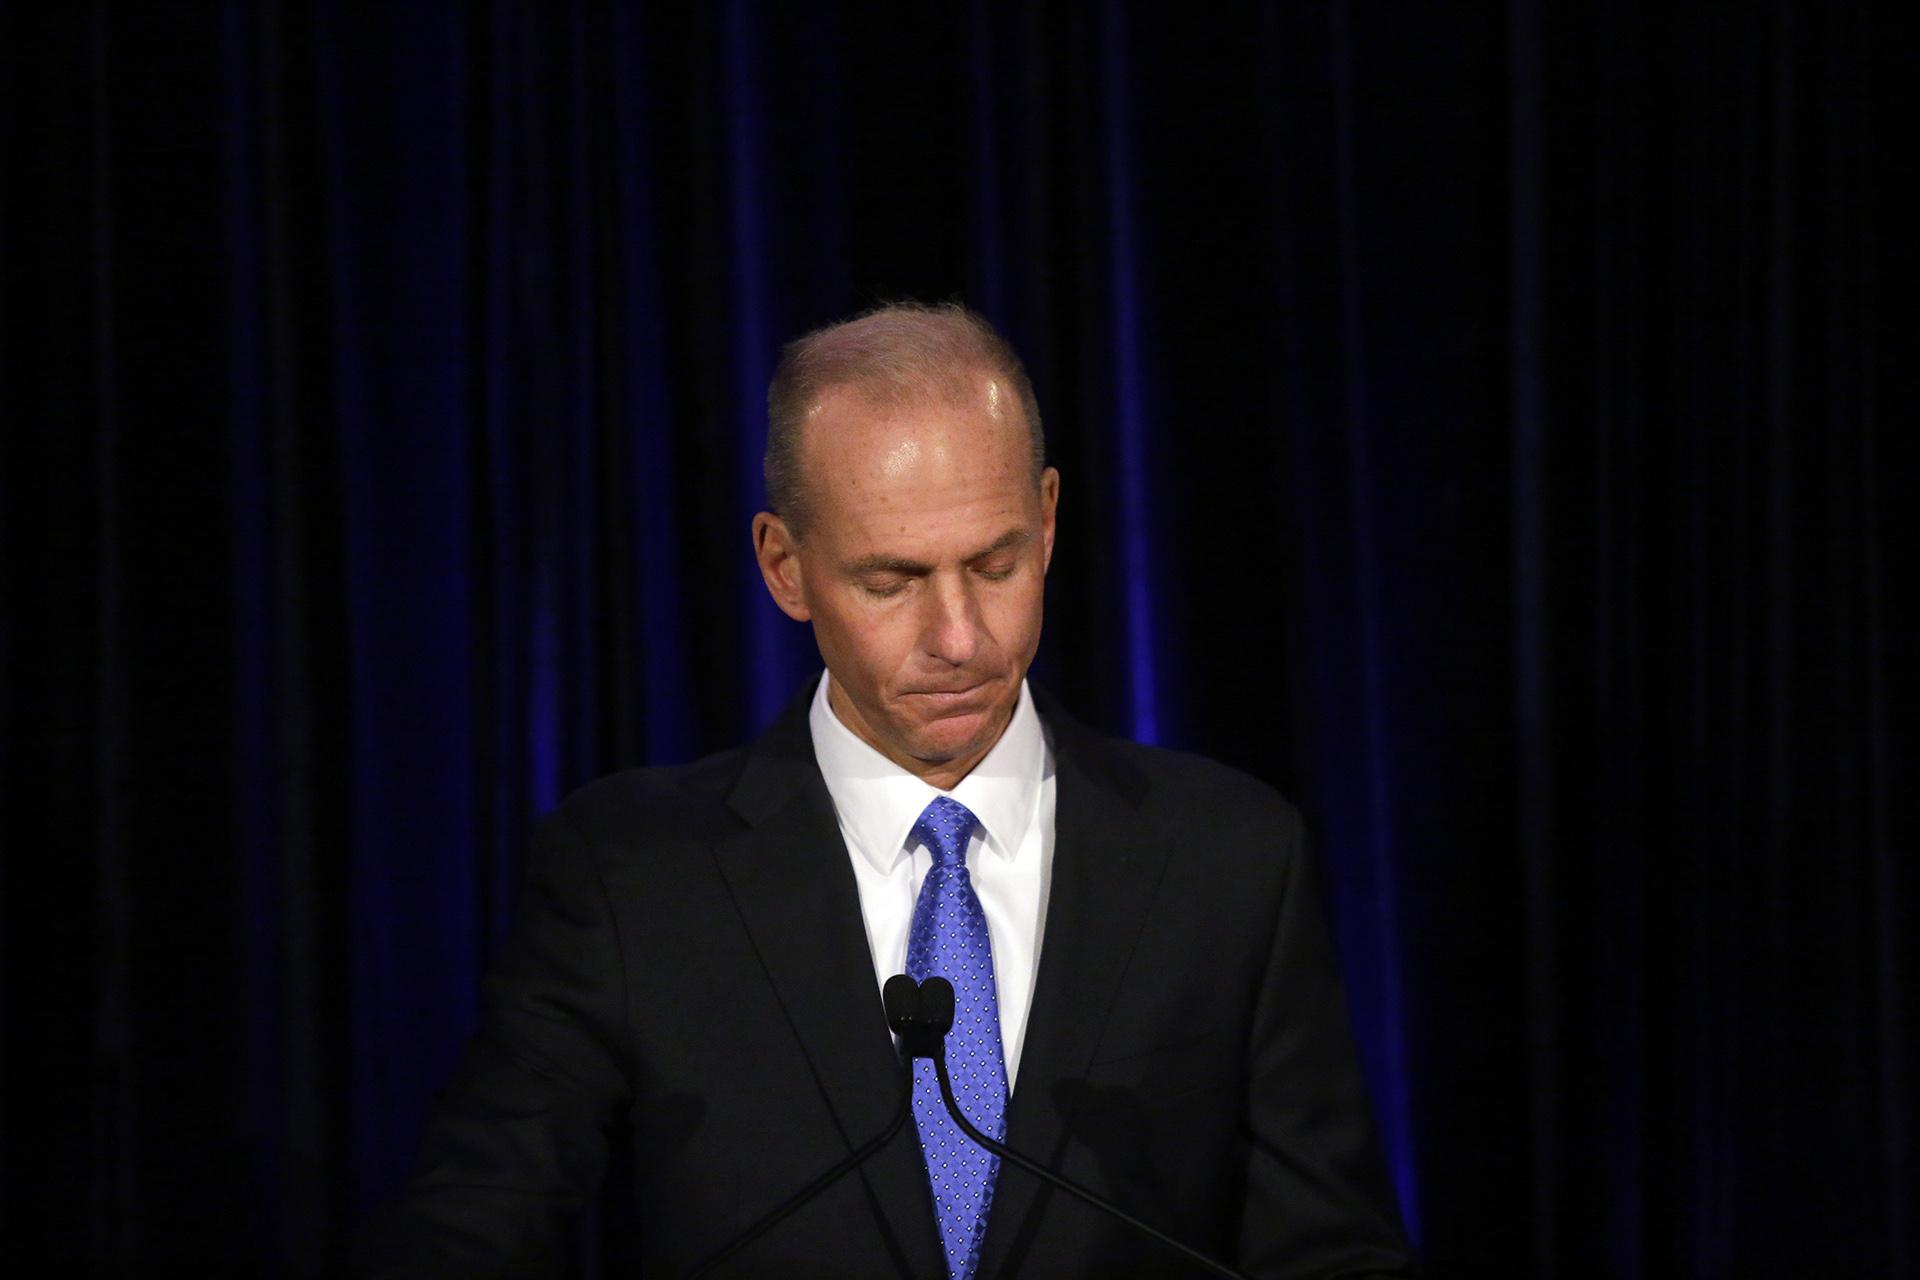 In this April 29, 2019, file pool photo Boeing Chief Executive Dennis Muilenburg speaks at a news conference after company’s annual shareholders meeting at the Field Museum in Chicago. (Joshua Lott / The Washington Post via AP, Pool, File)